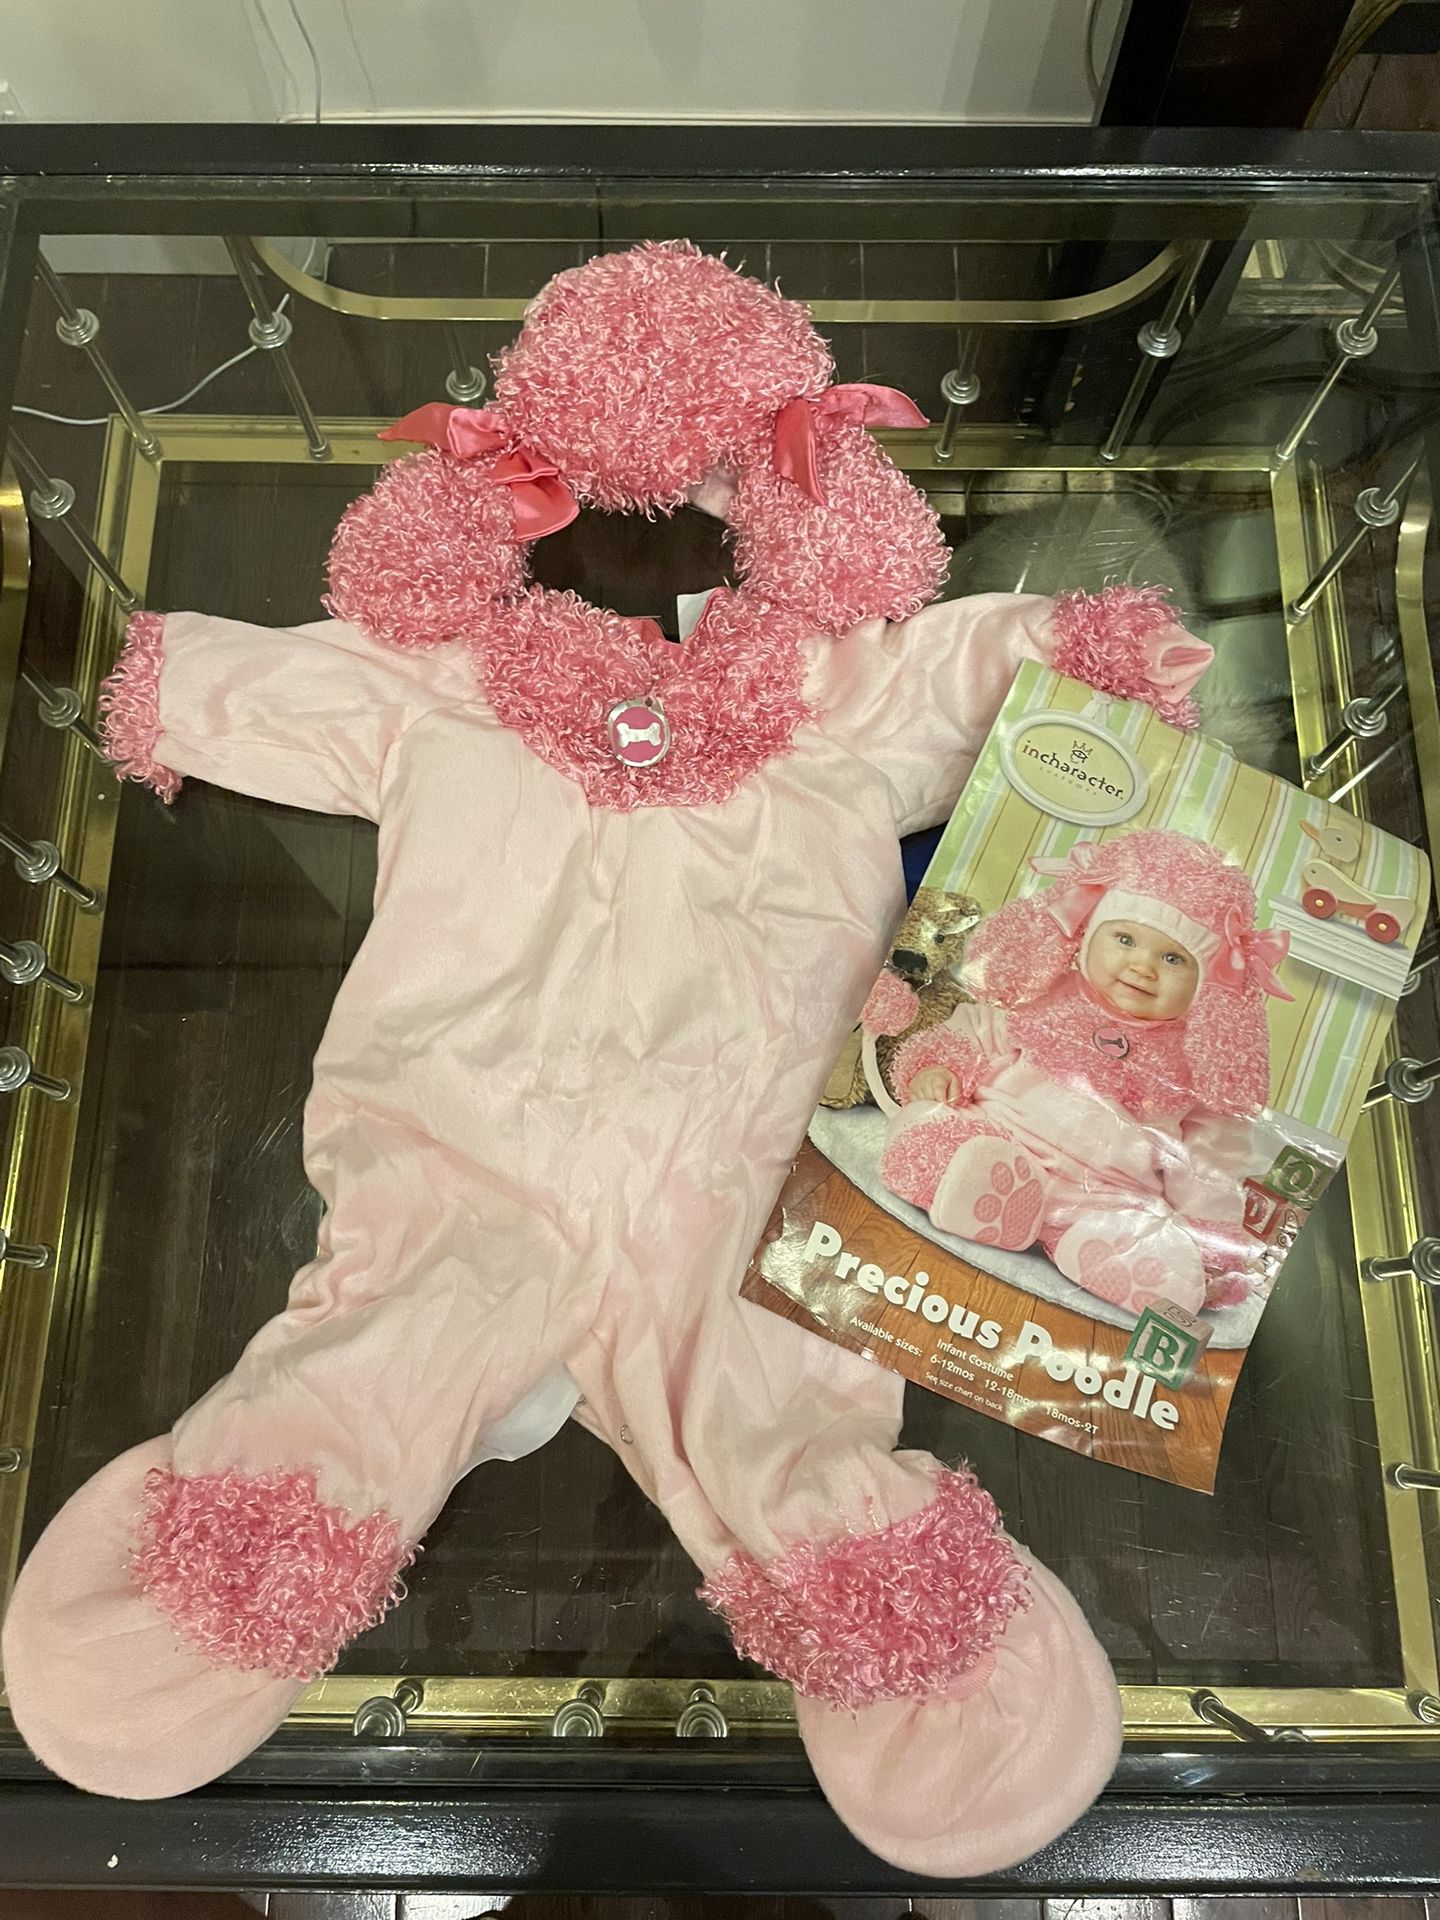 Chasing Fireflies Pink Precious Poodle Infant Costume - 18 months / 2T 